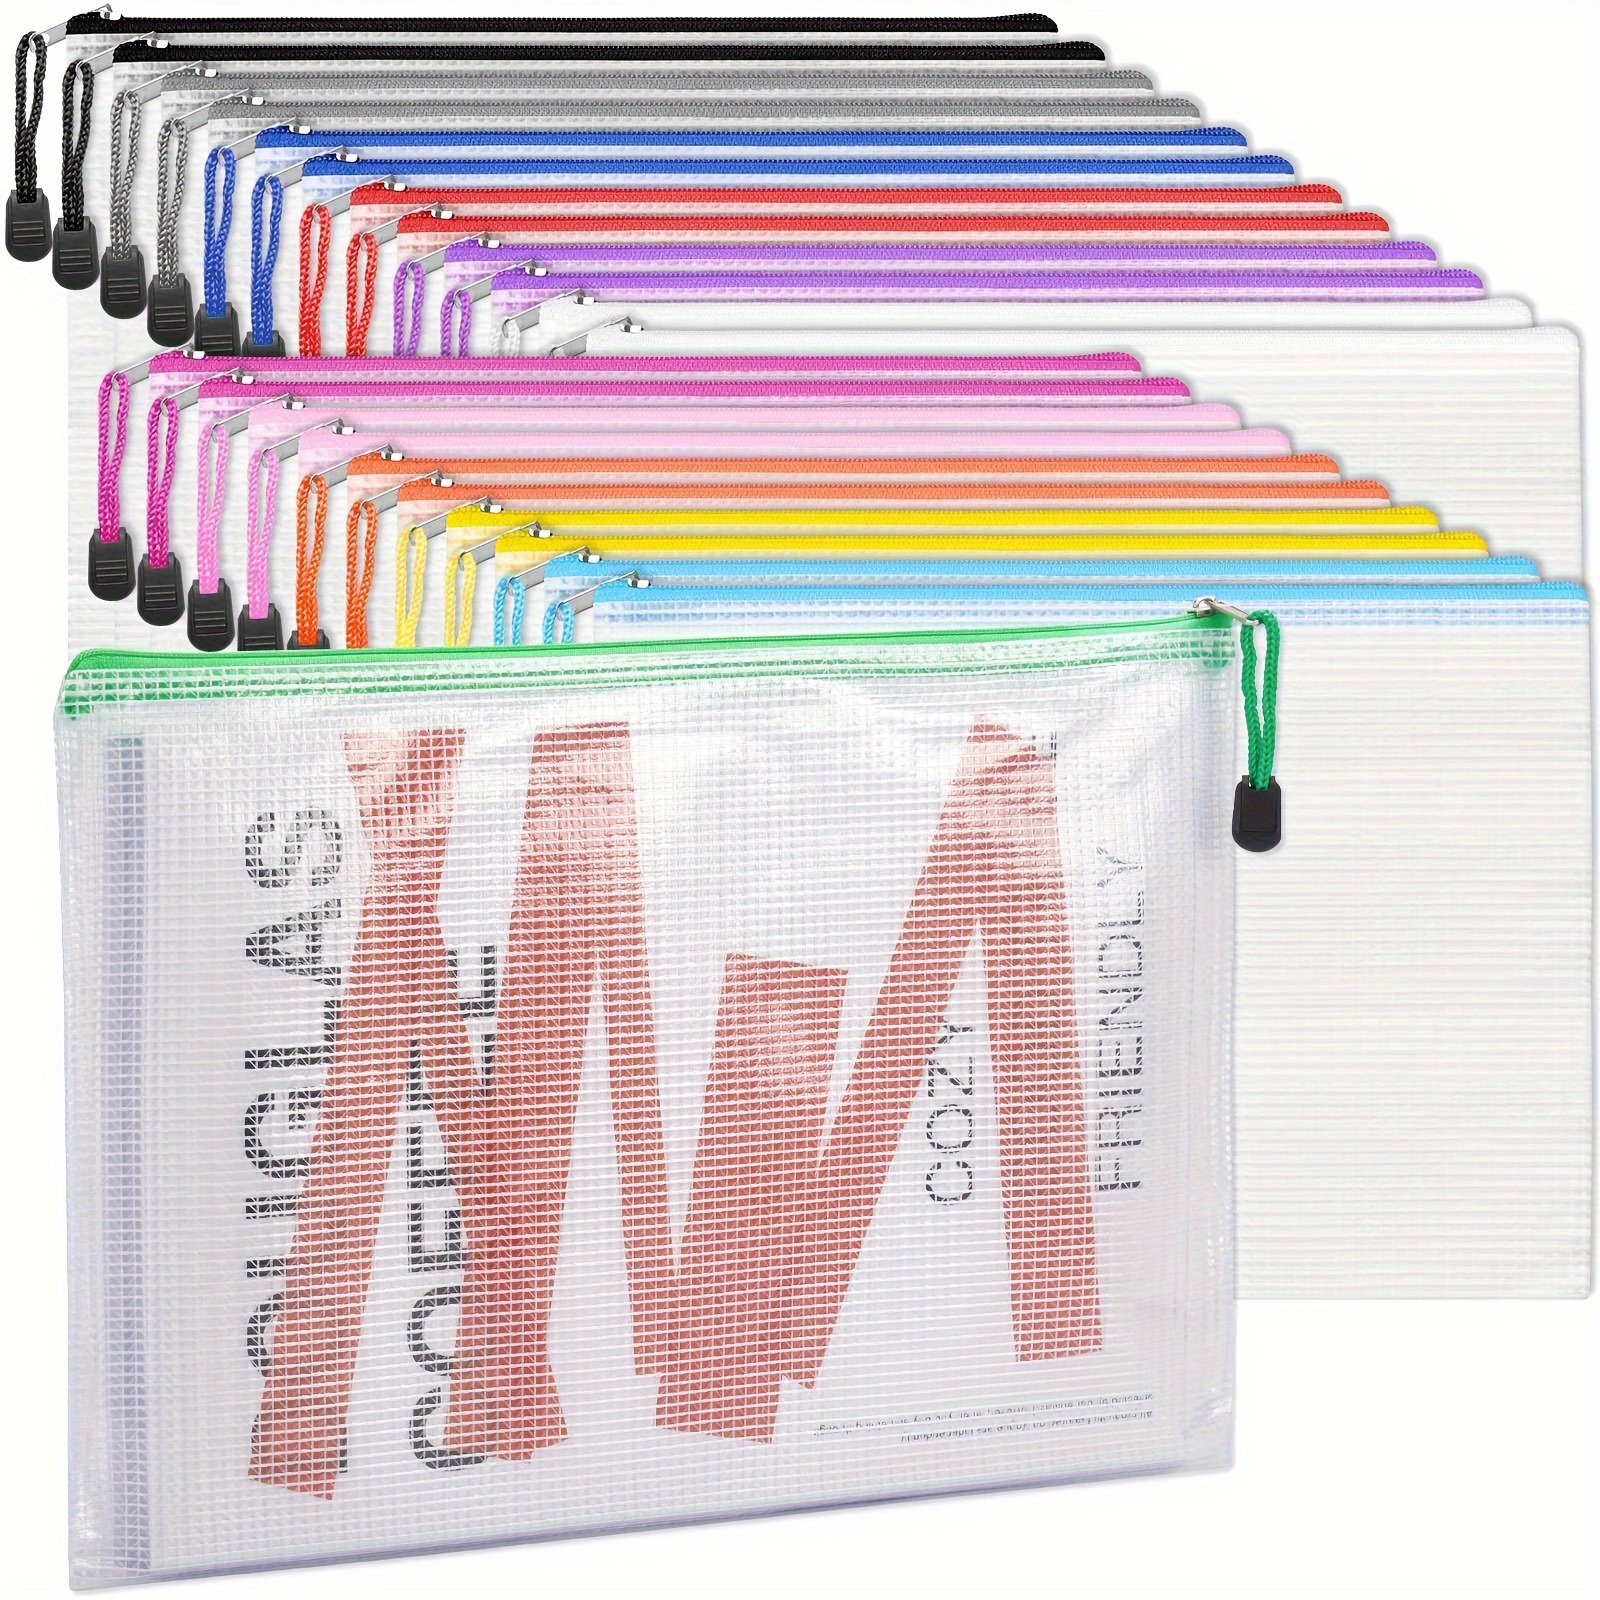  Mesh Zipper Pouch Bags, 36Pcs Zipper Pouches for Organizing, 8  Size 8 Color Waterproof Plastic Zipper Bag for Office School Supplies Game  File Storage : Office Products